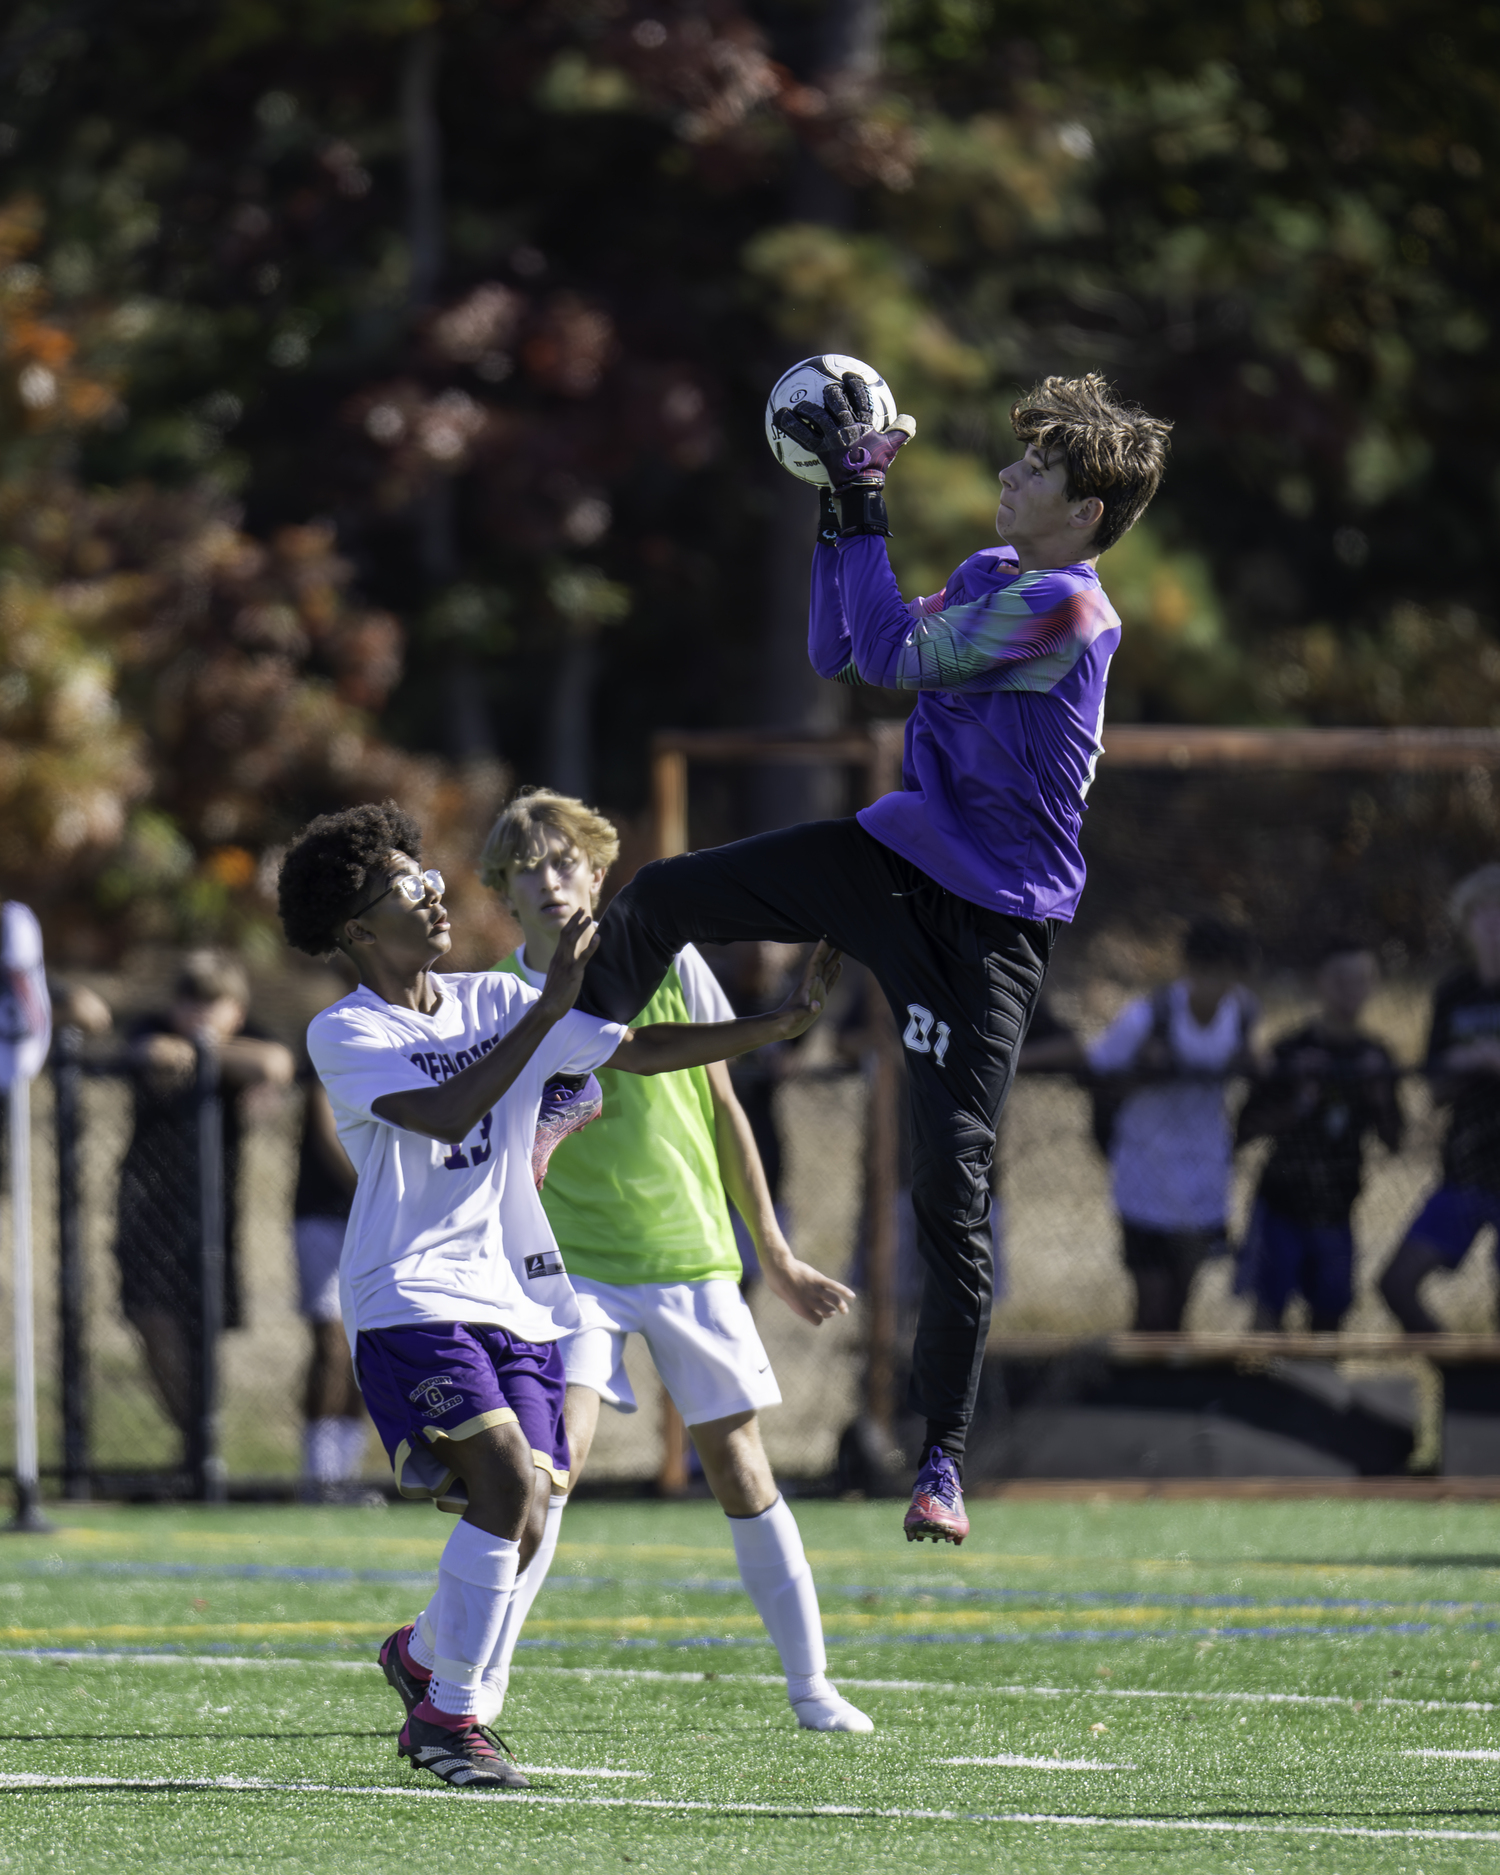 Pierson senior George Ingolia was active and aggressive in Saturday's county final, amassing 11 saves.   MARIANNE BARNETT